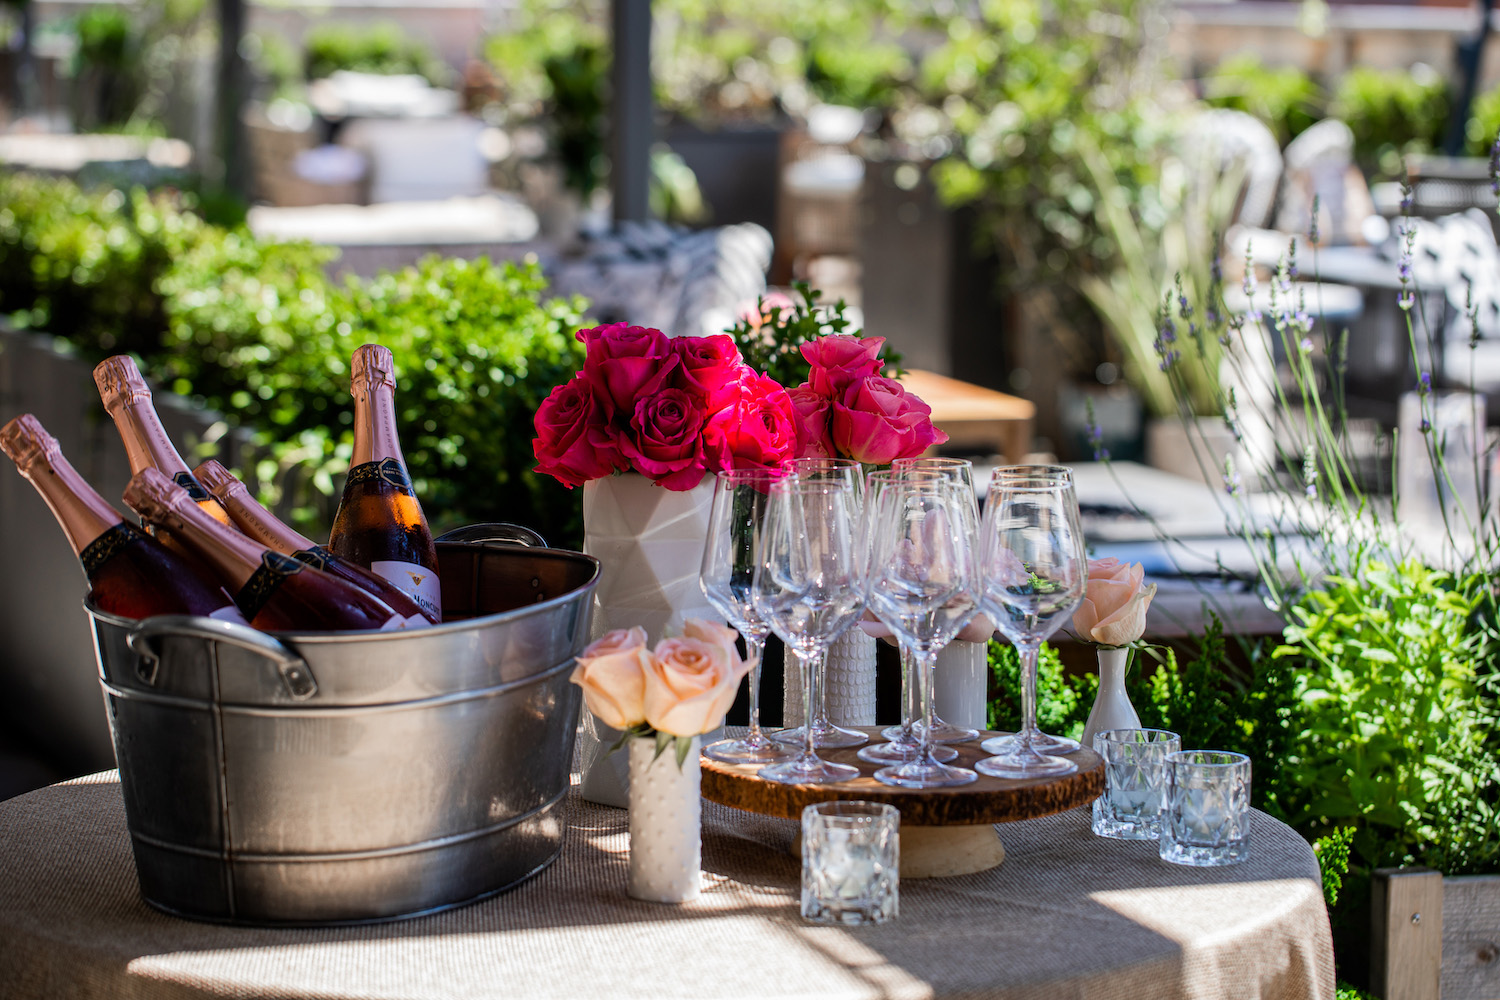 bottles of rose and wine glasses arranged on the patio table